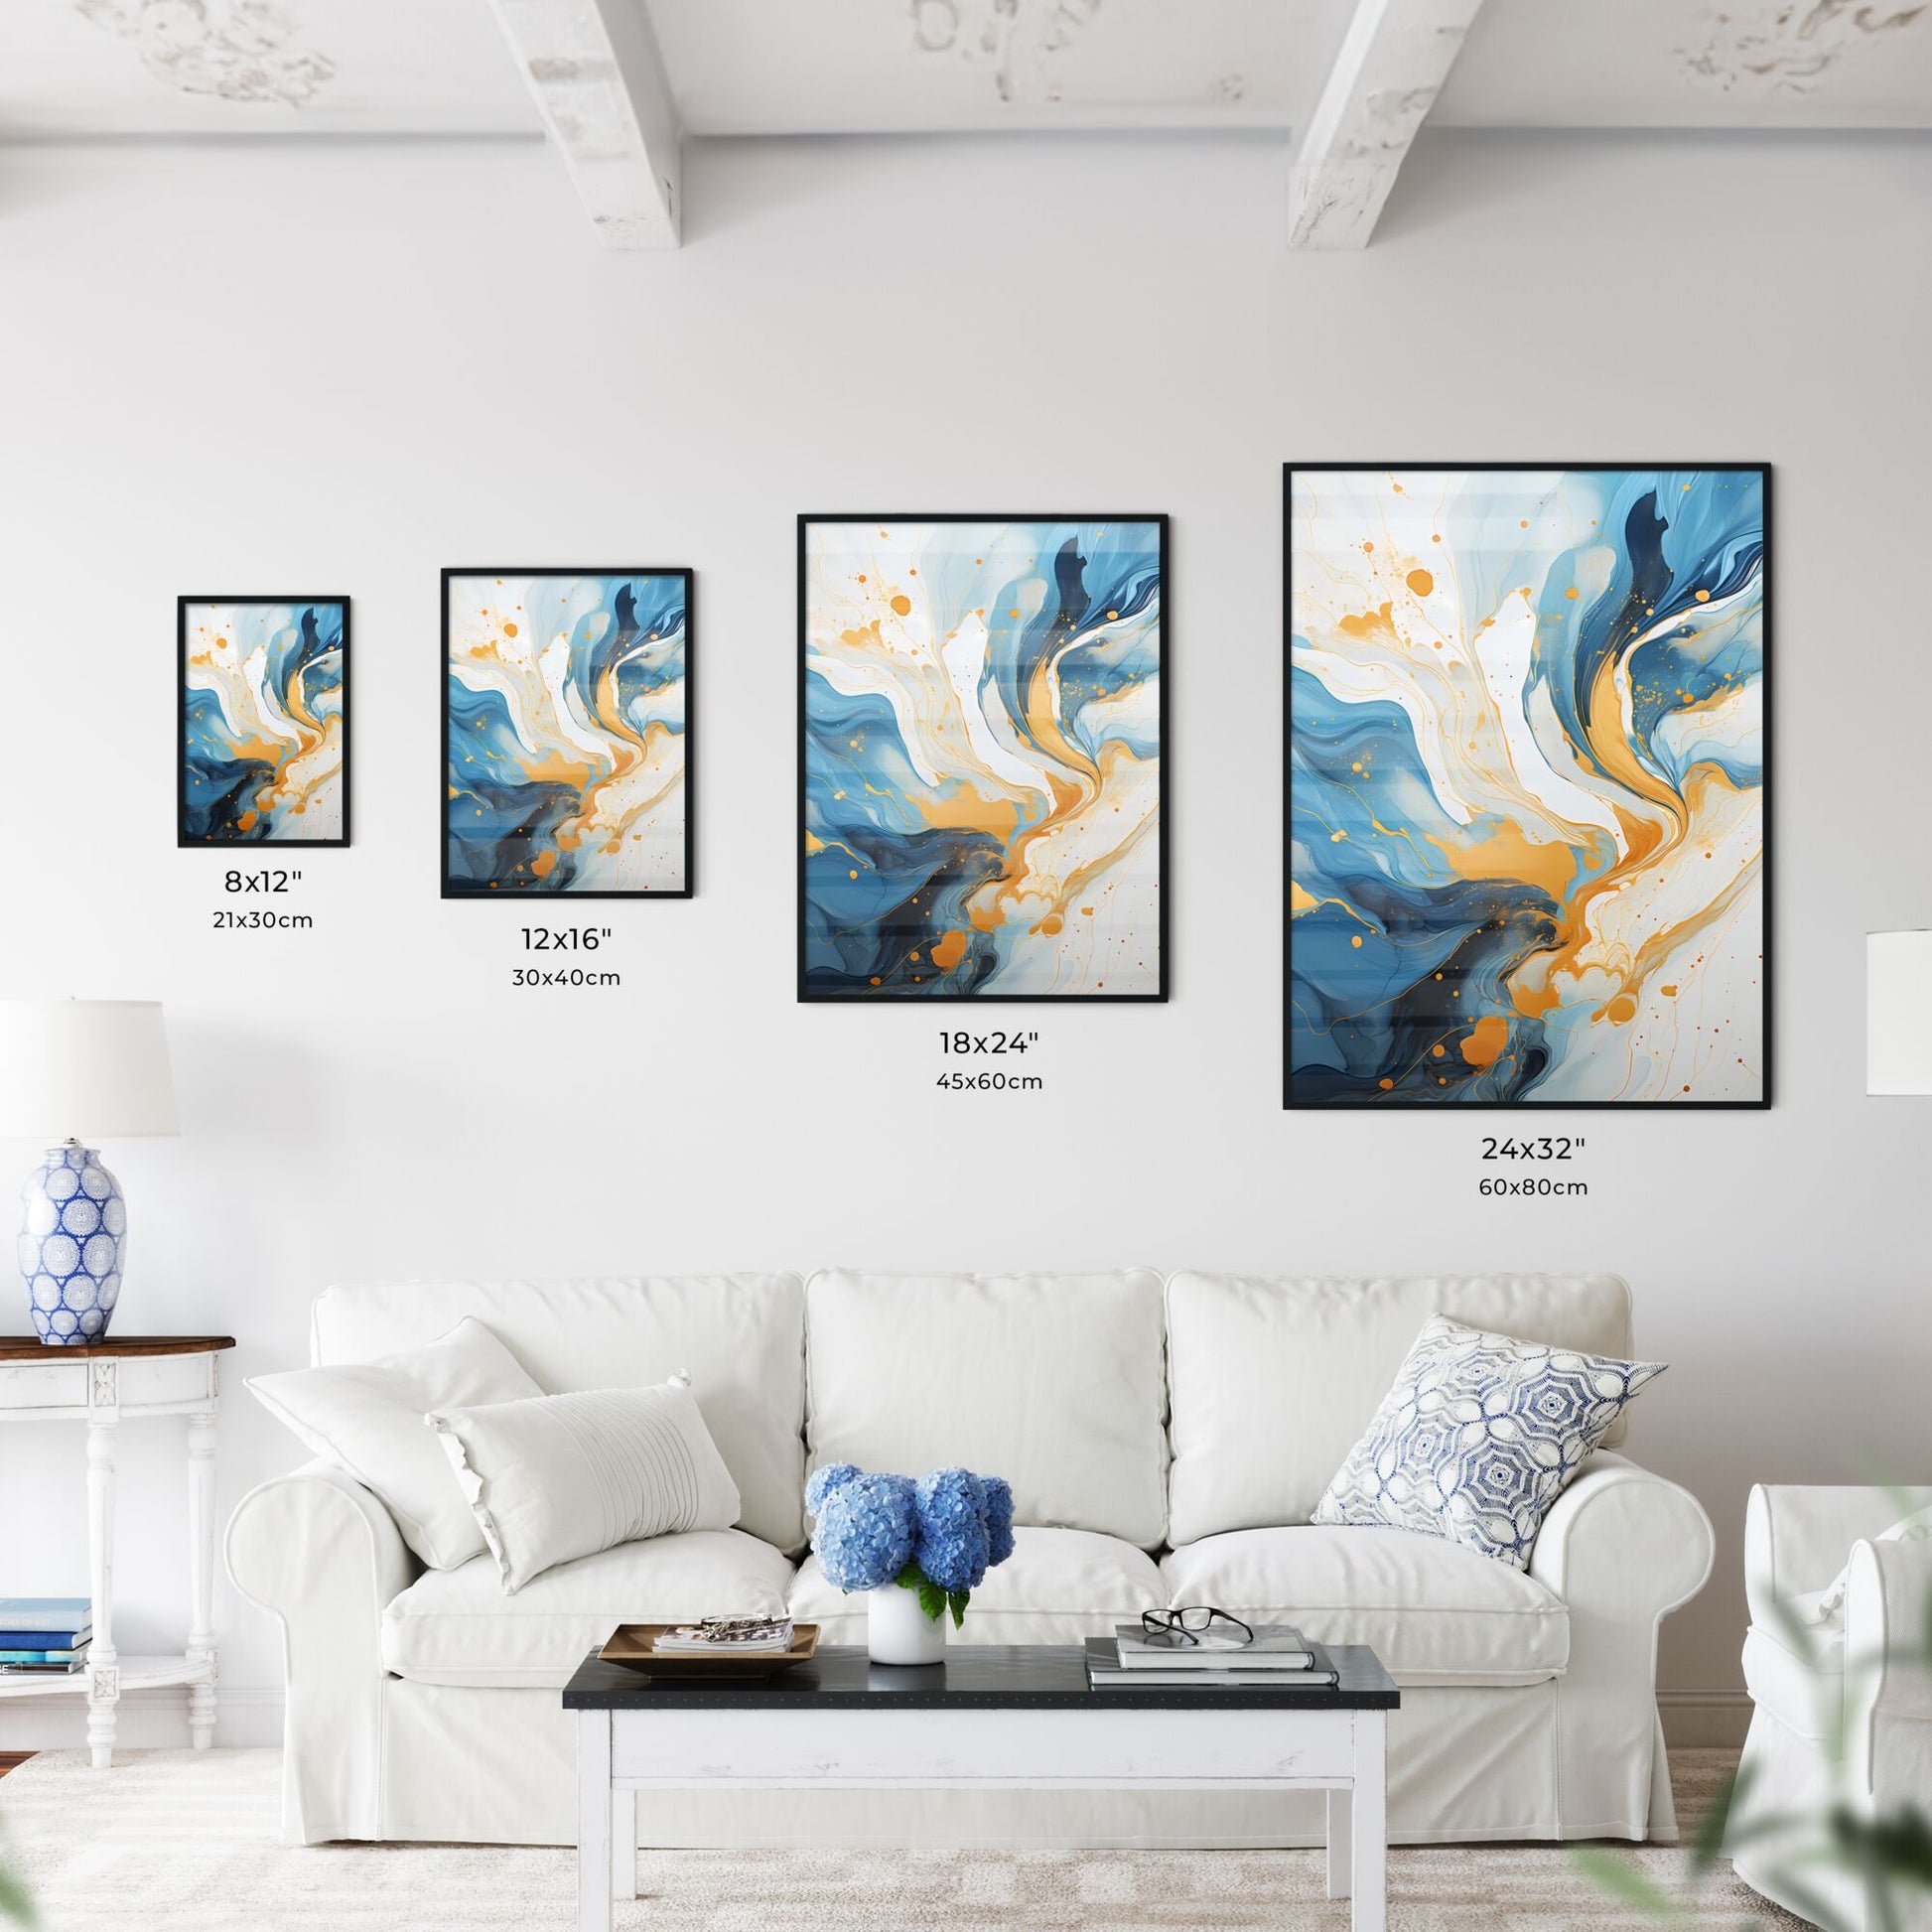 Blue And Gold Swirls On A White Surface Art Print Default Title